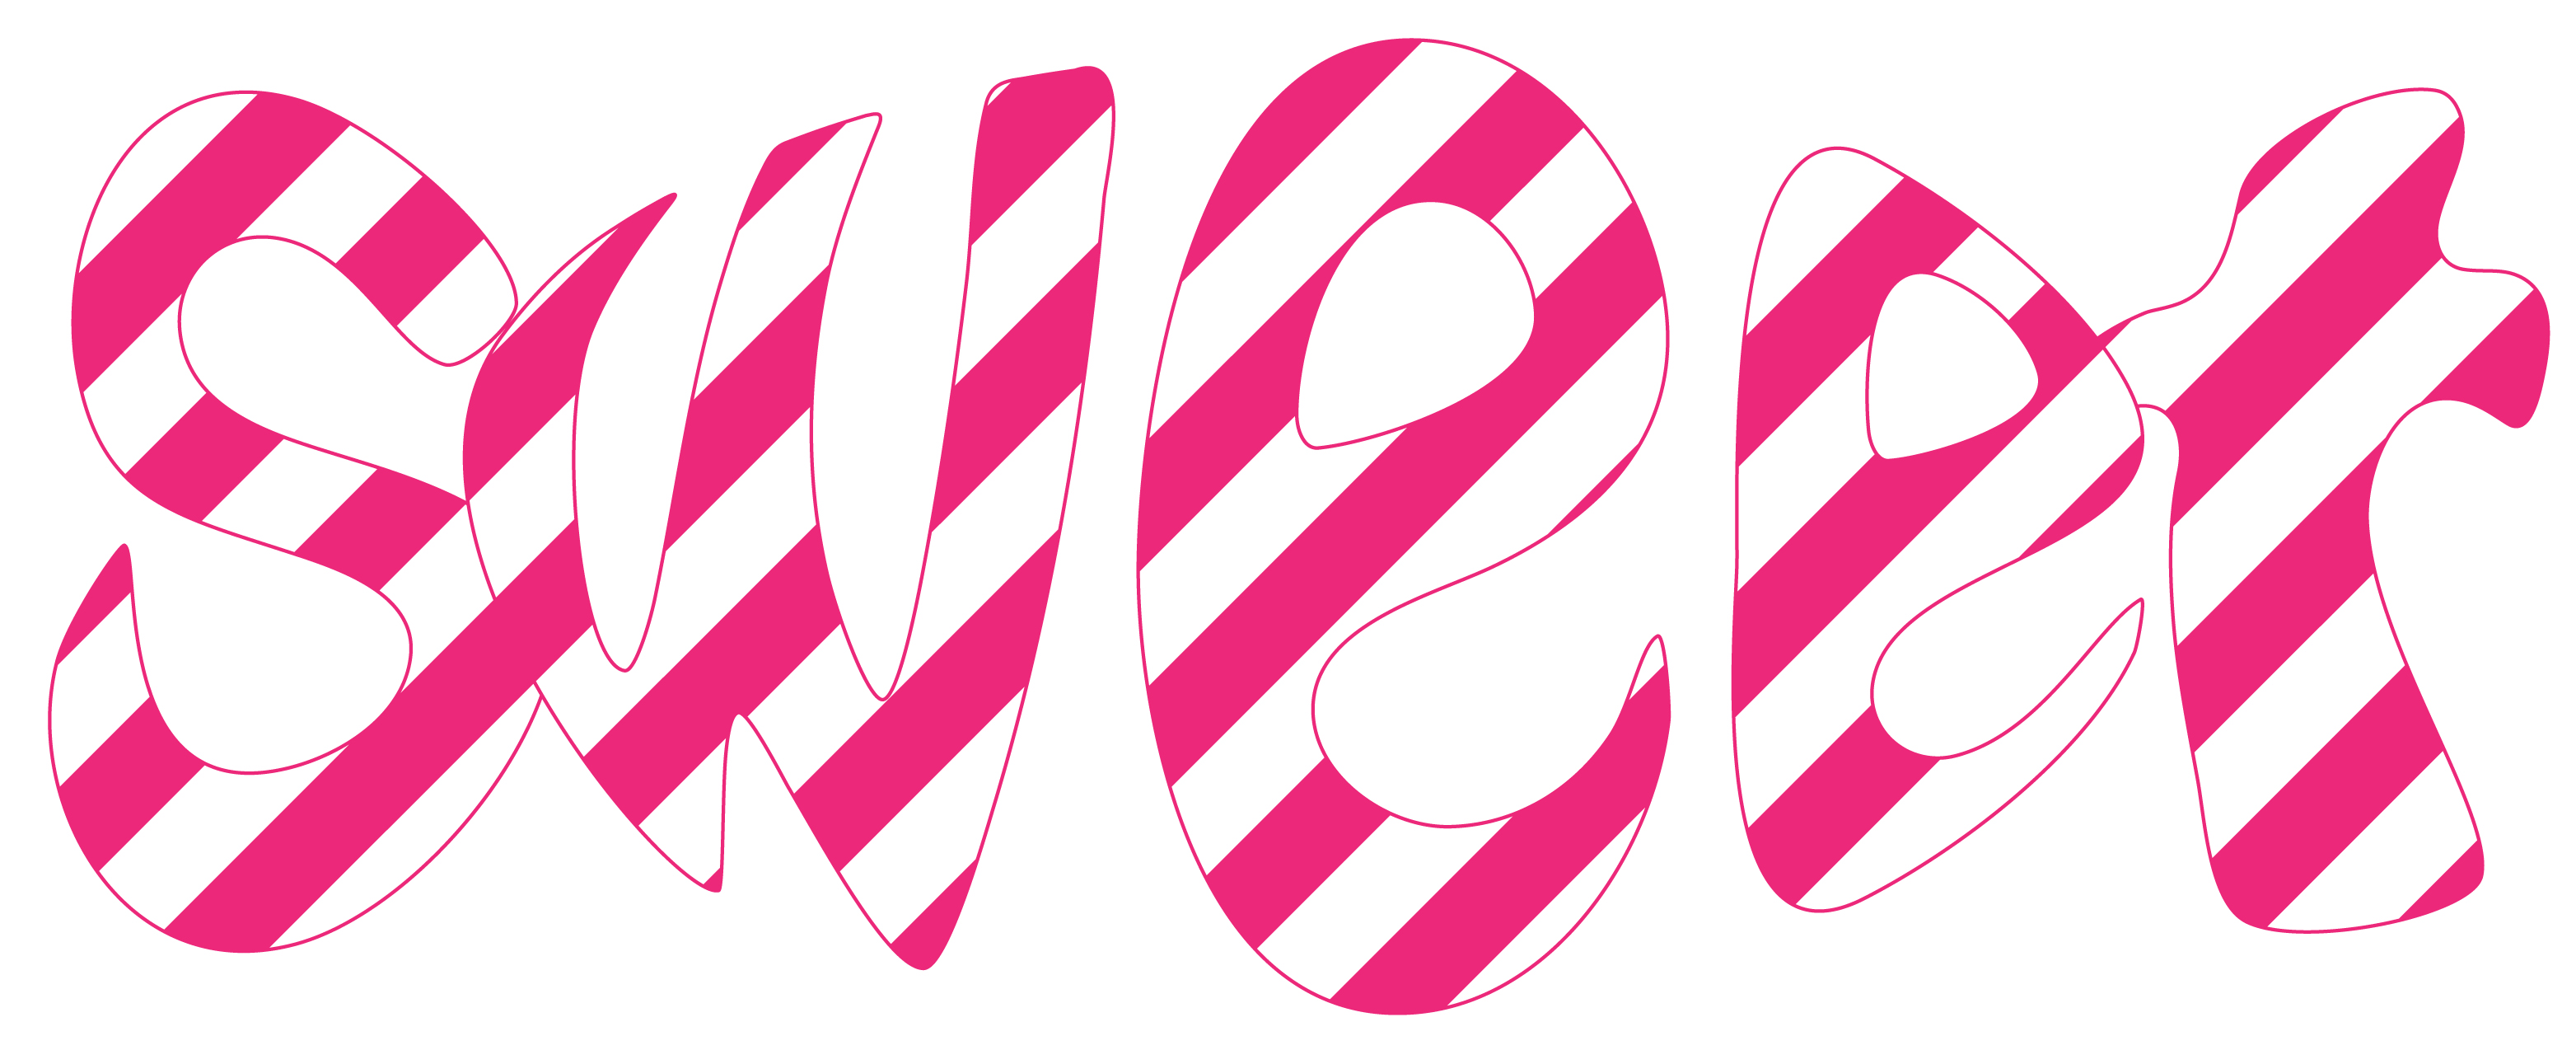 Hobo Std Medium font has been combined with a candy stripe design to give i...